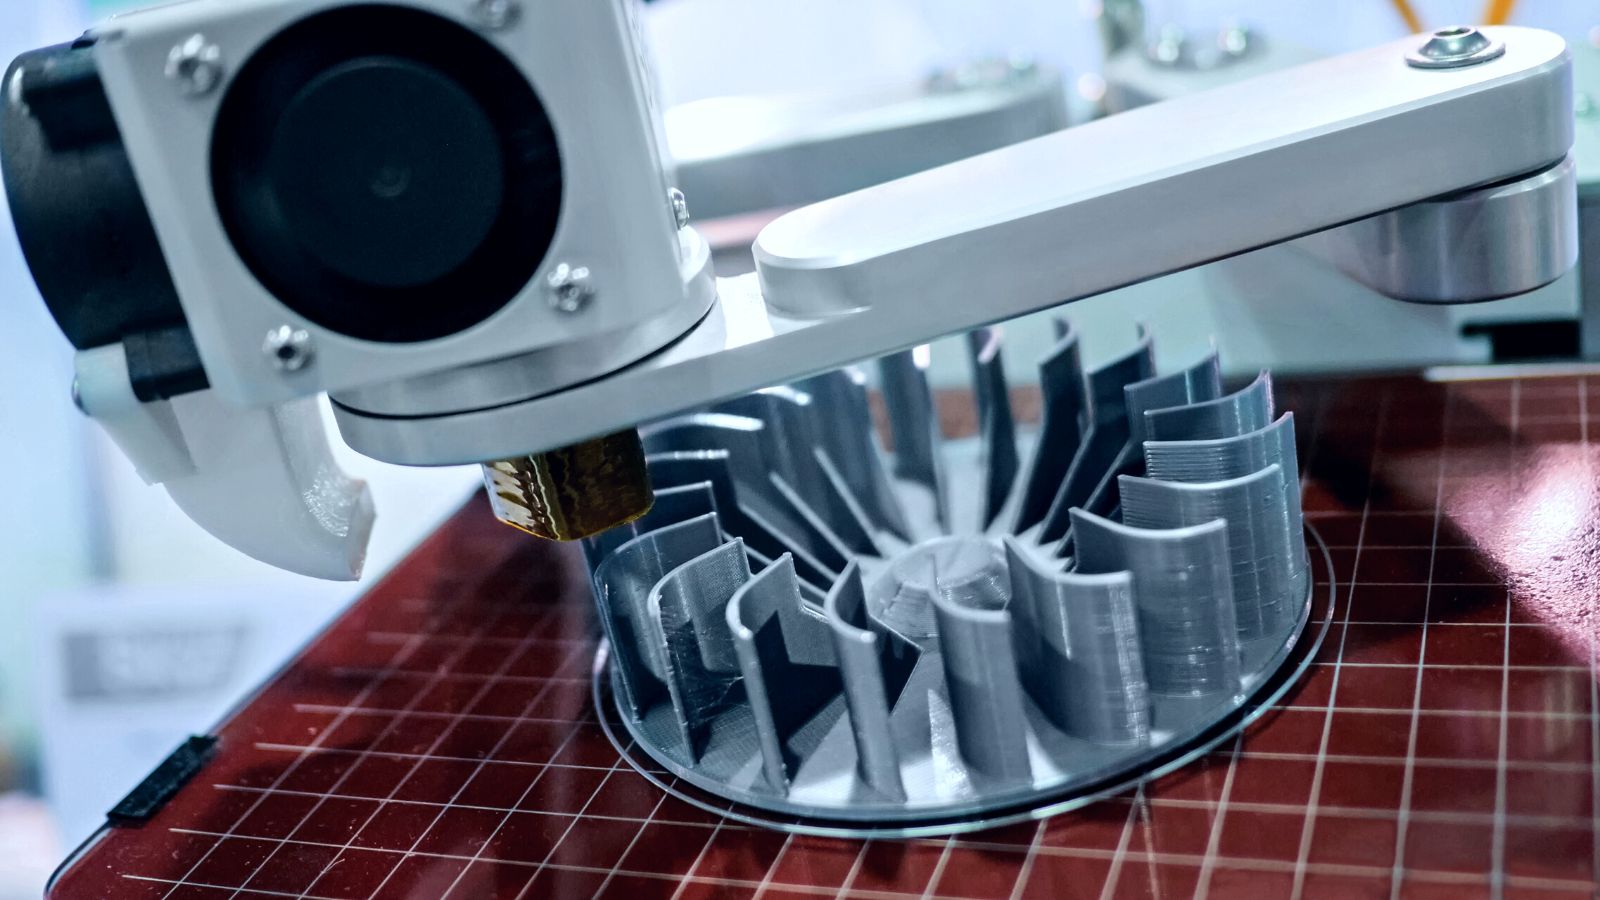 5 Common Misconceptions Surrounding Metal 3D Printing